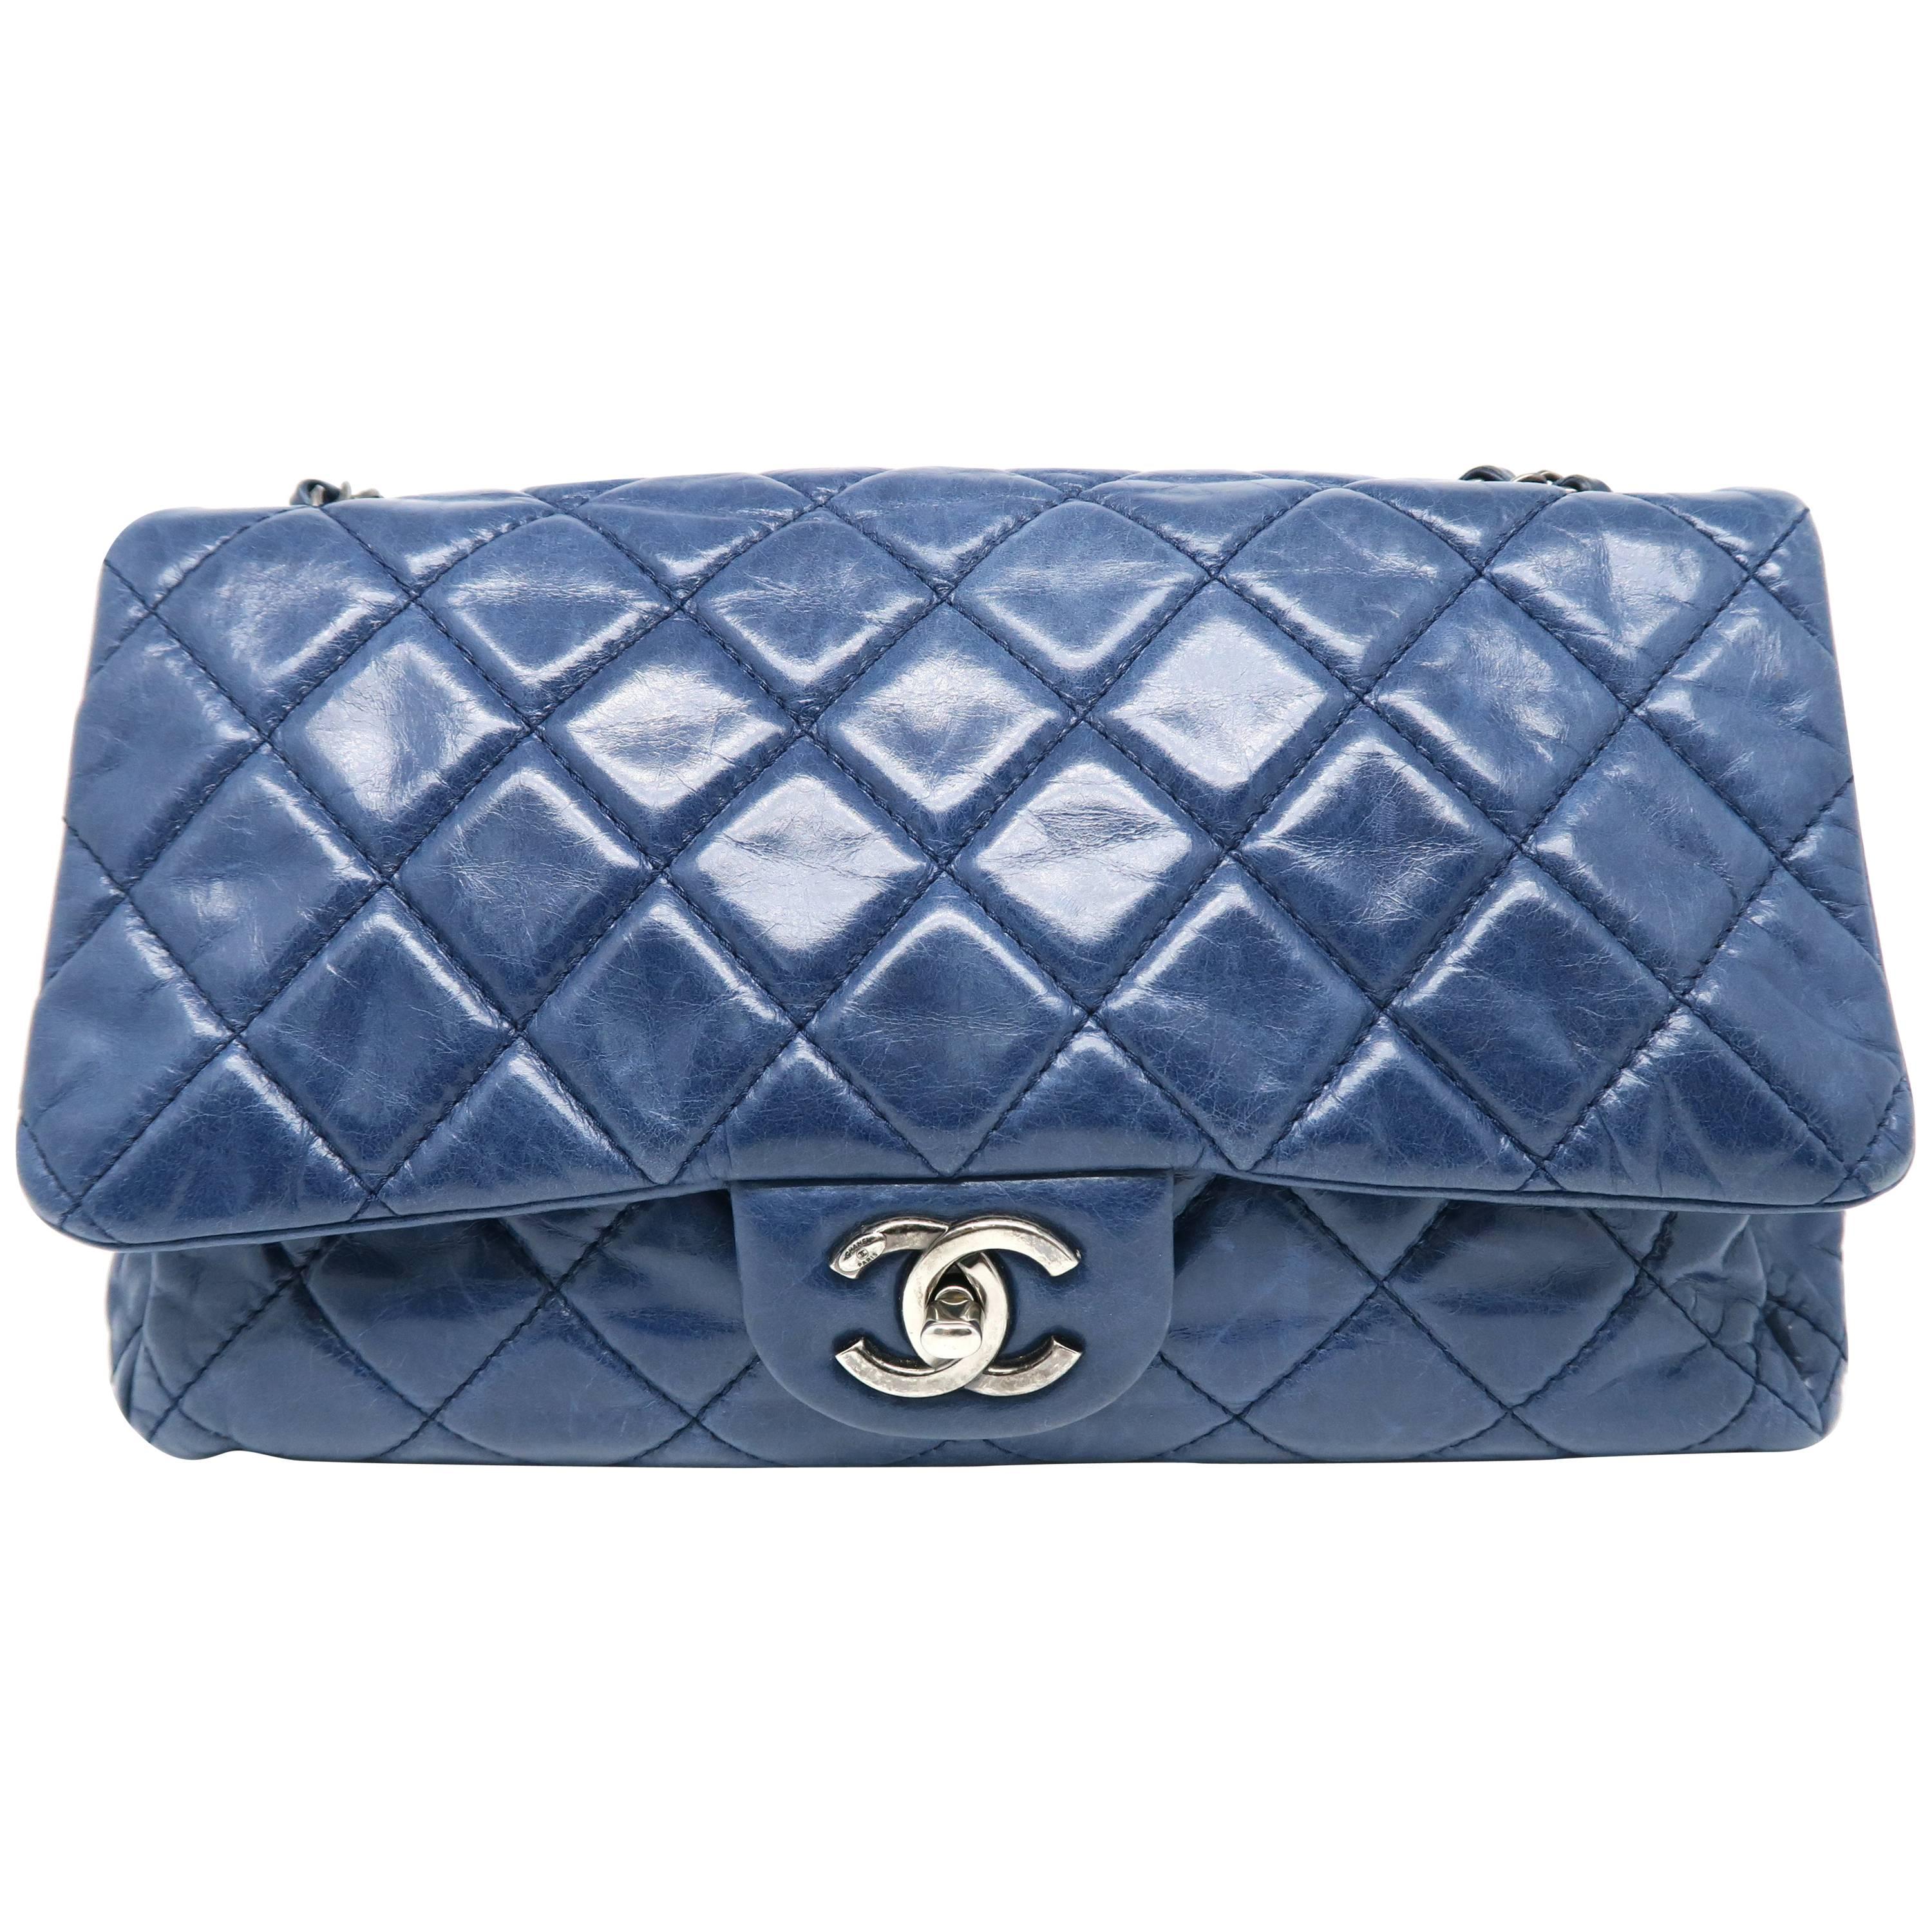 Chanel Blue Quilting Calfskin Leather Silver Metal Chain Shoulder Bag For Sale